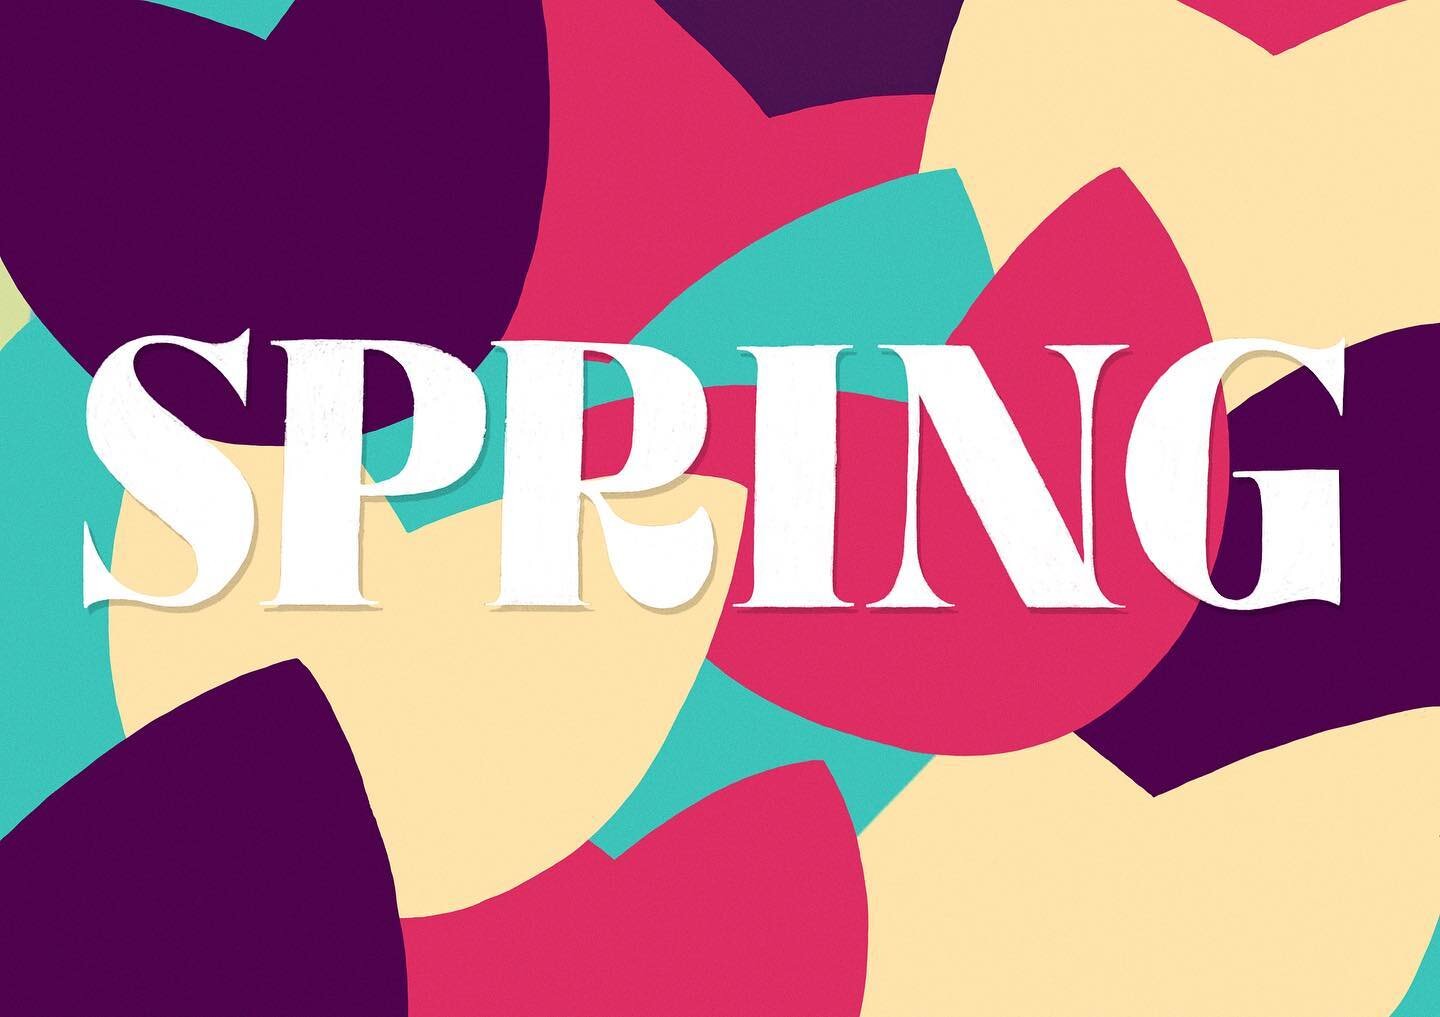 It&rsquo;s finally tulip&rsquo;s season in the northern hemisphere, HEY SPRING! 🌷

#lettering #letteringartist #spring #springillustration #tulips🌷